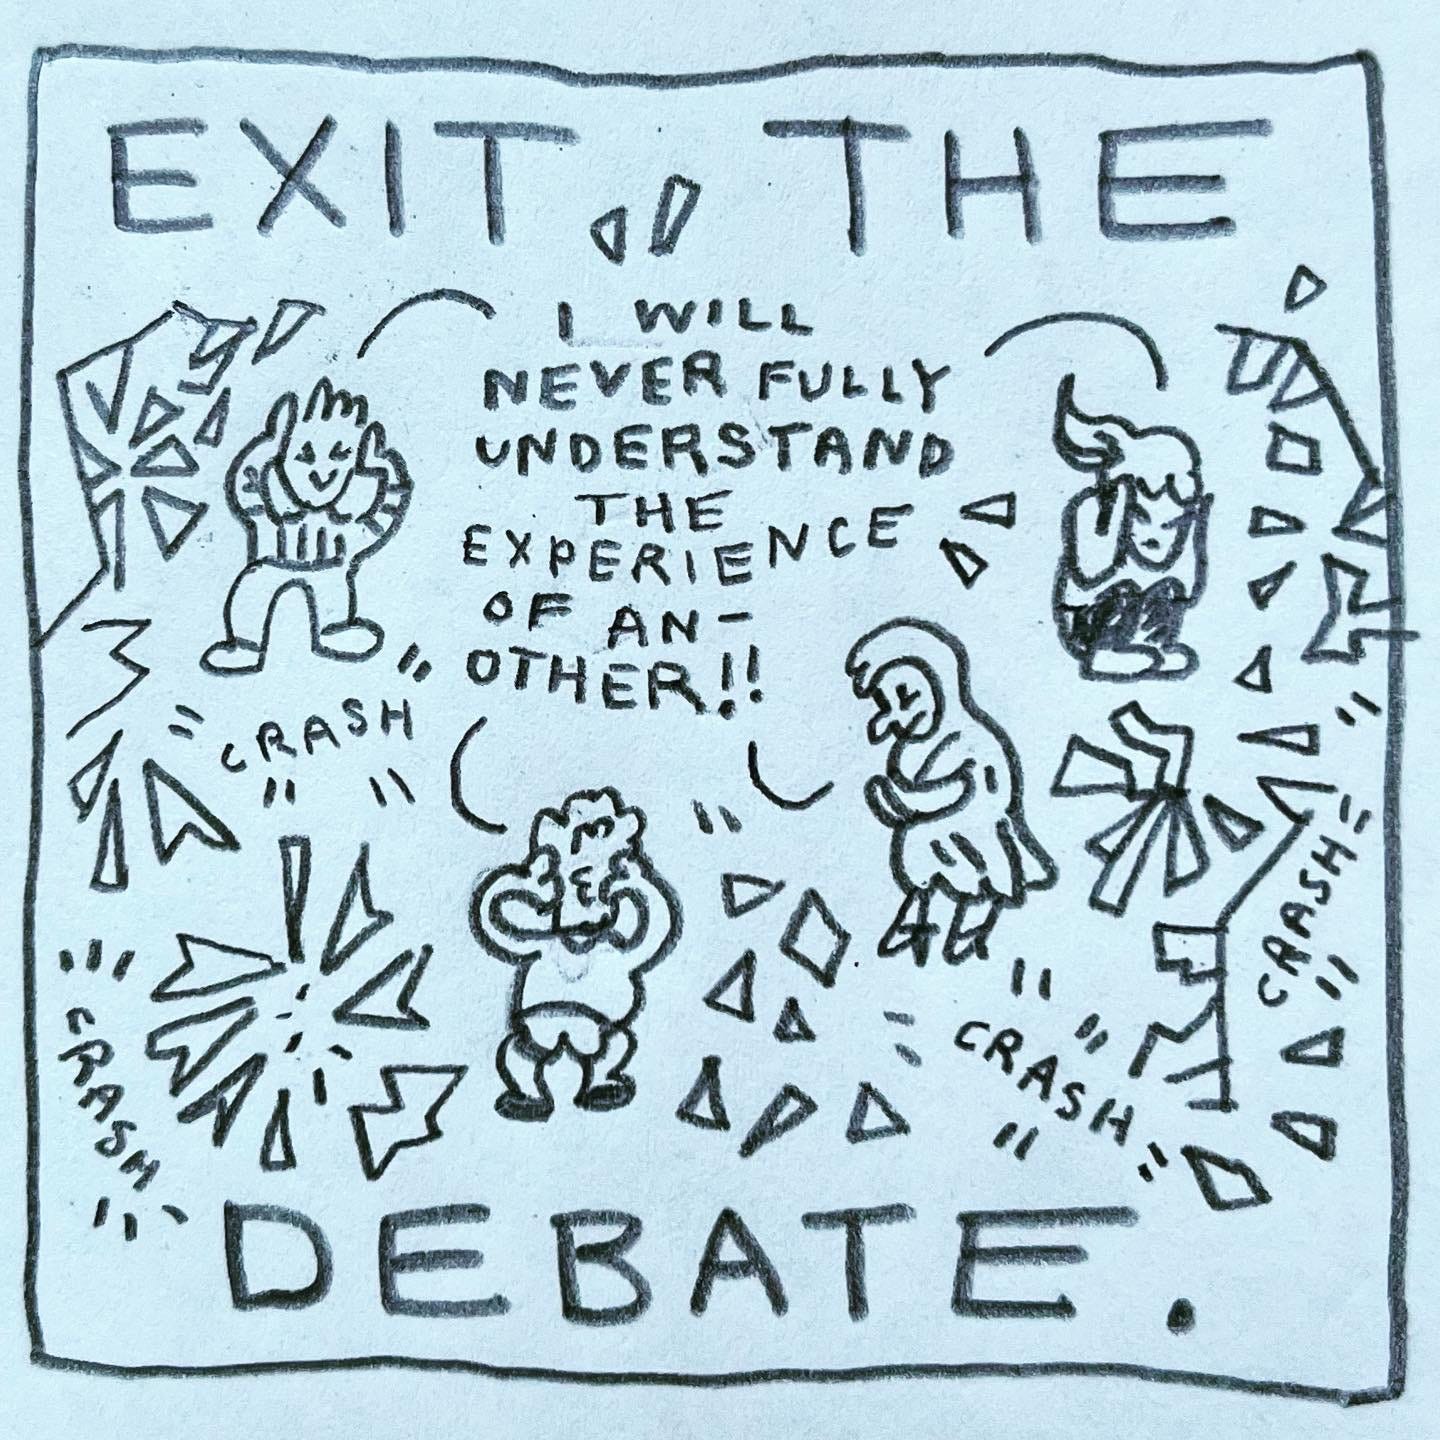 Panel 4: exit the debate. Image: the mirrors crash all around the people in the maze. They cover their ears and squeeze their eyes shut tight. All of them exclaim in unison, "I will never fully understand the experience of another!!"